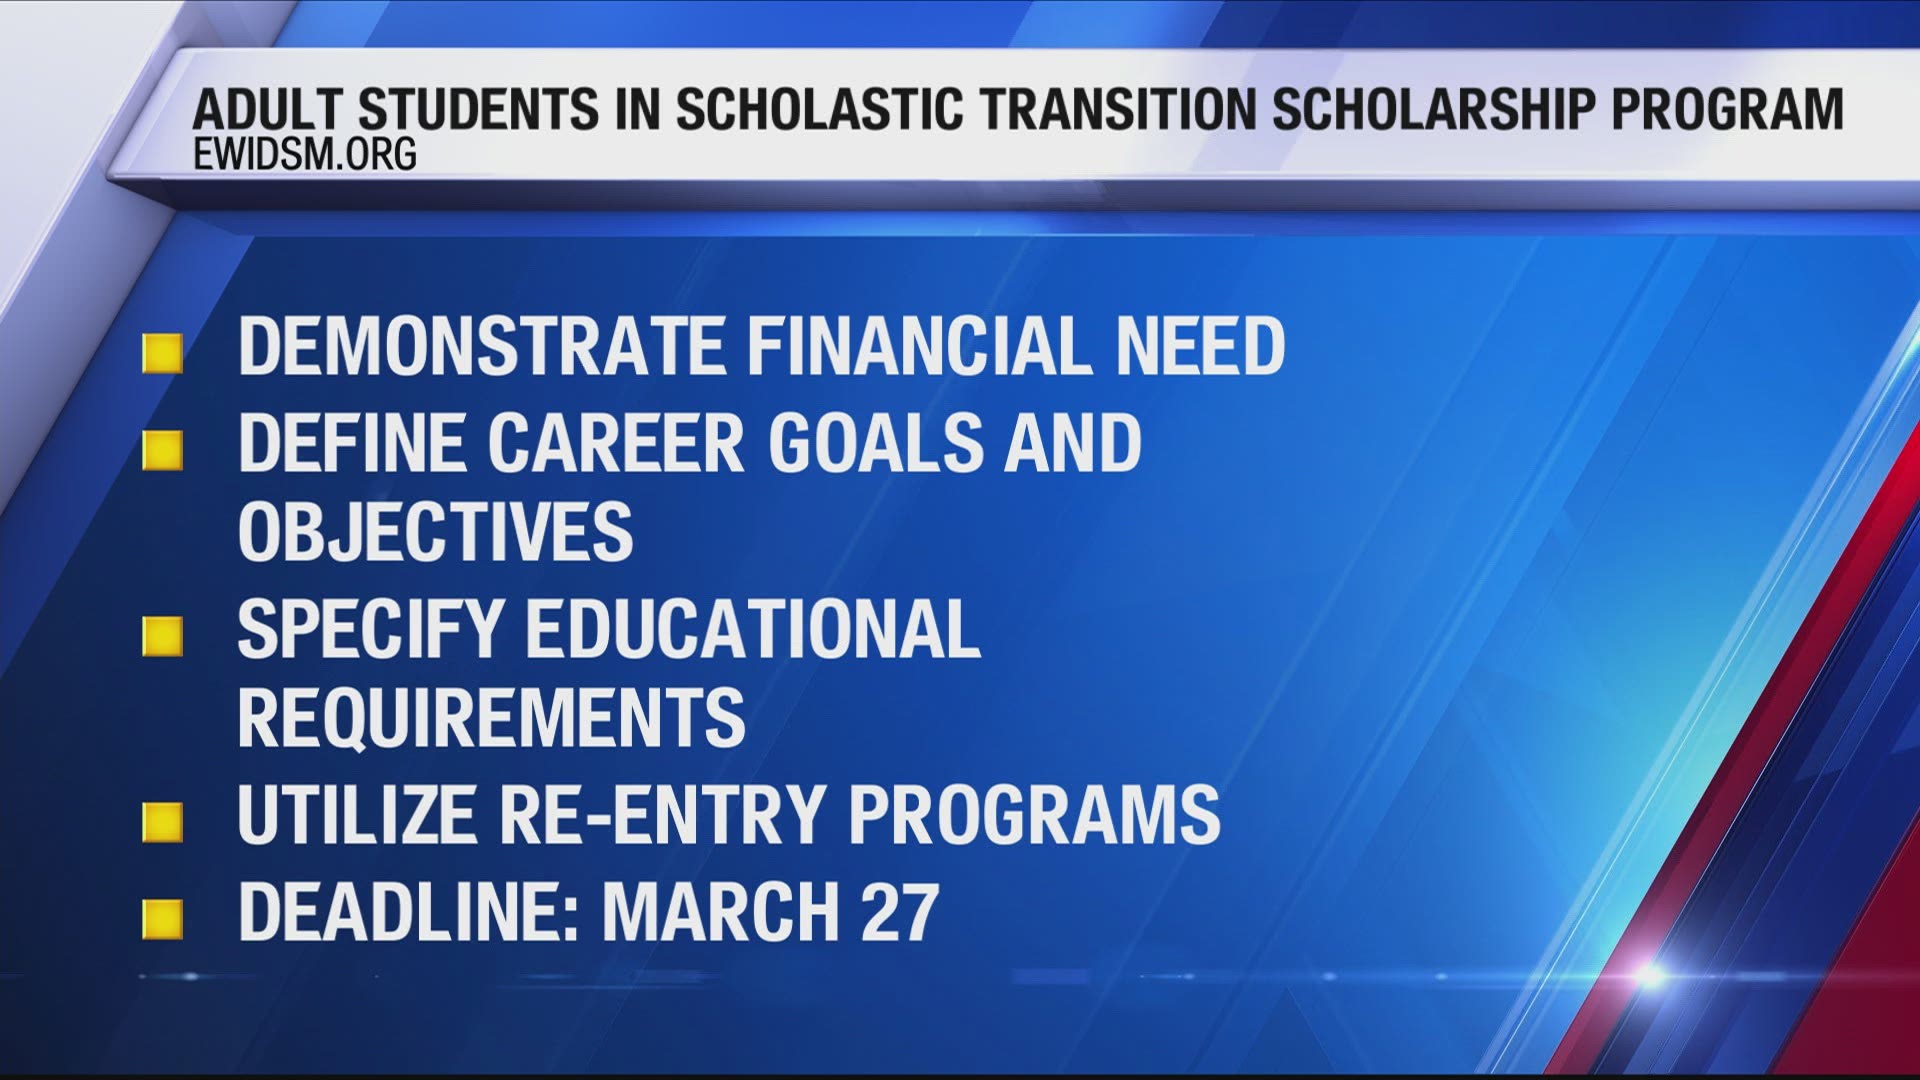 Adults looking to achieve a higher education can now apply for financial assistance with EWI's Adult Students in Scholastic Transition scholarship program.